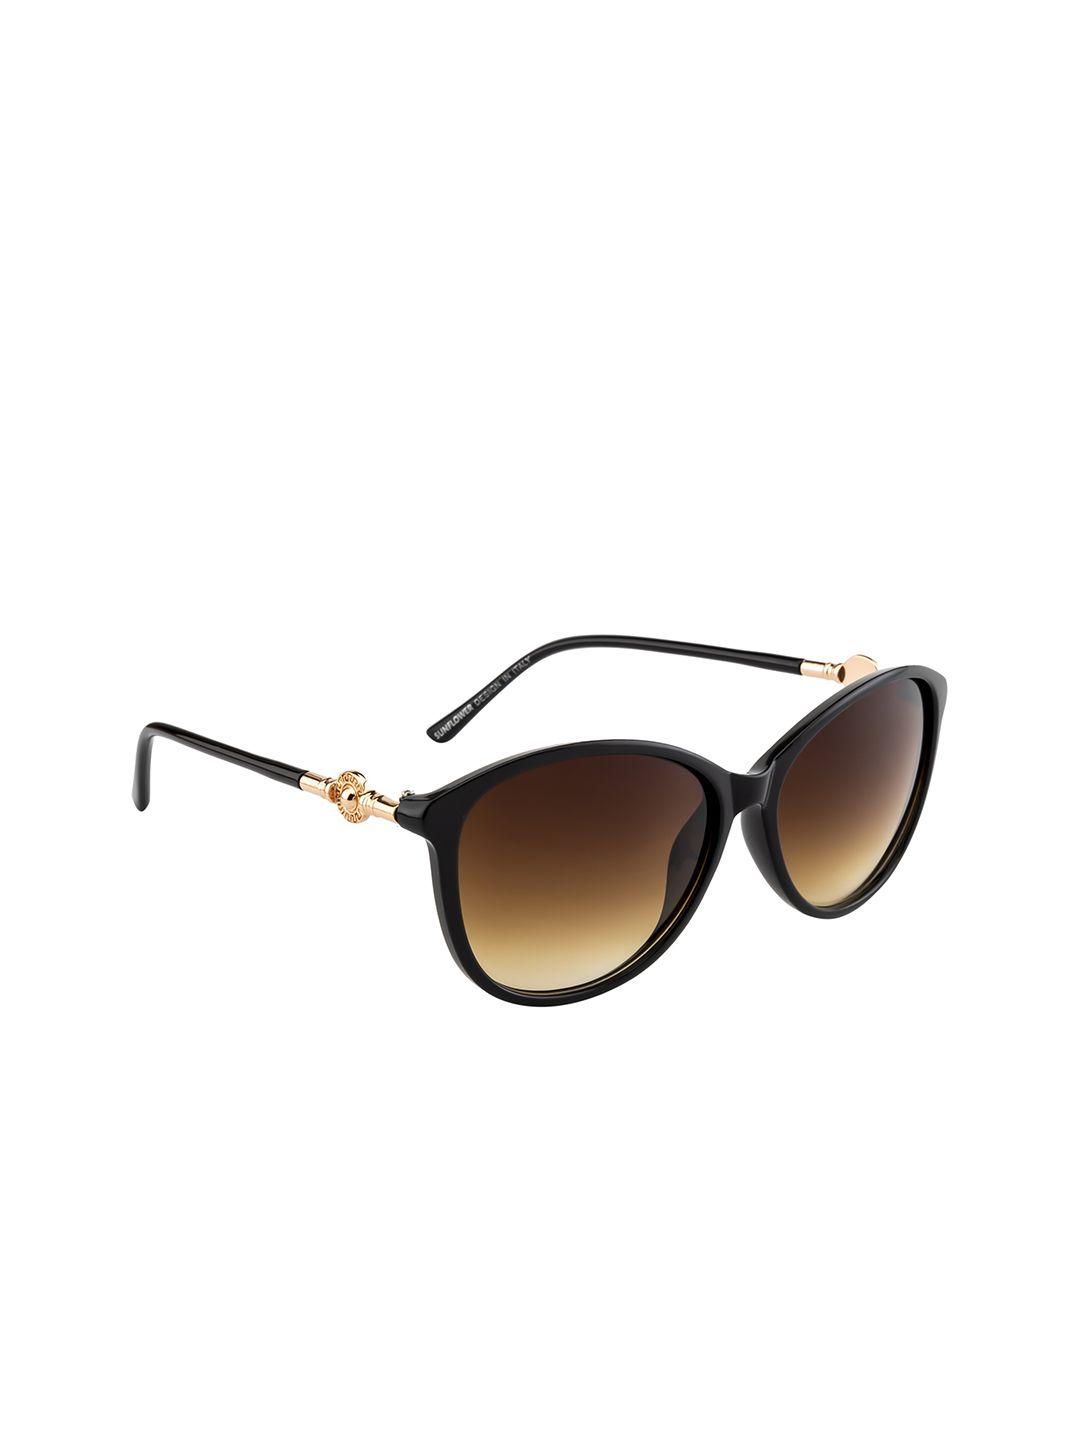 dressberry brown oval sunglasses with uv protected lens